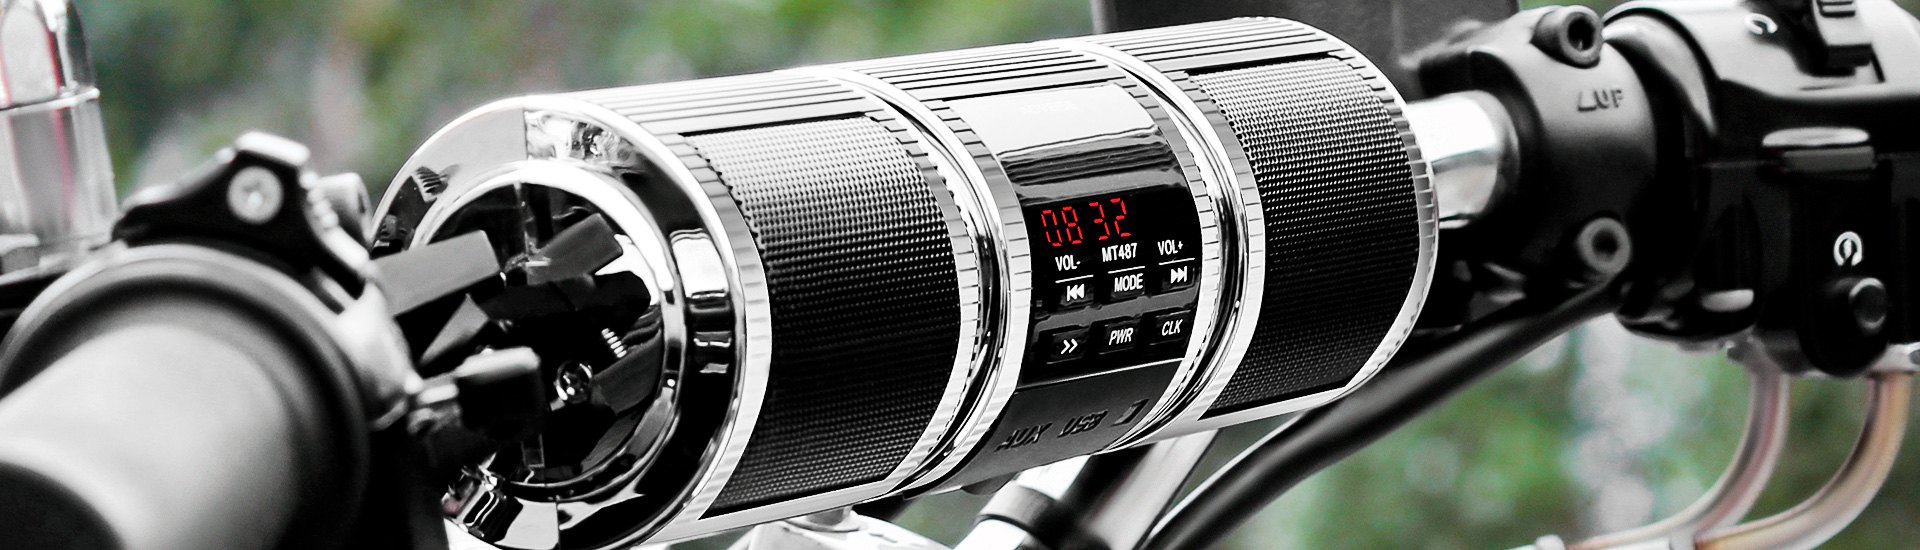 Universal Motorcycle Sound Systems